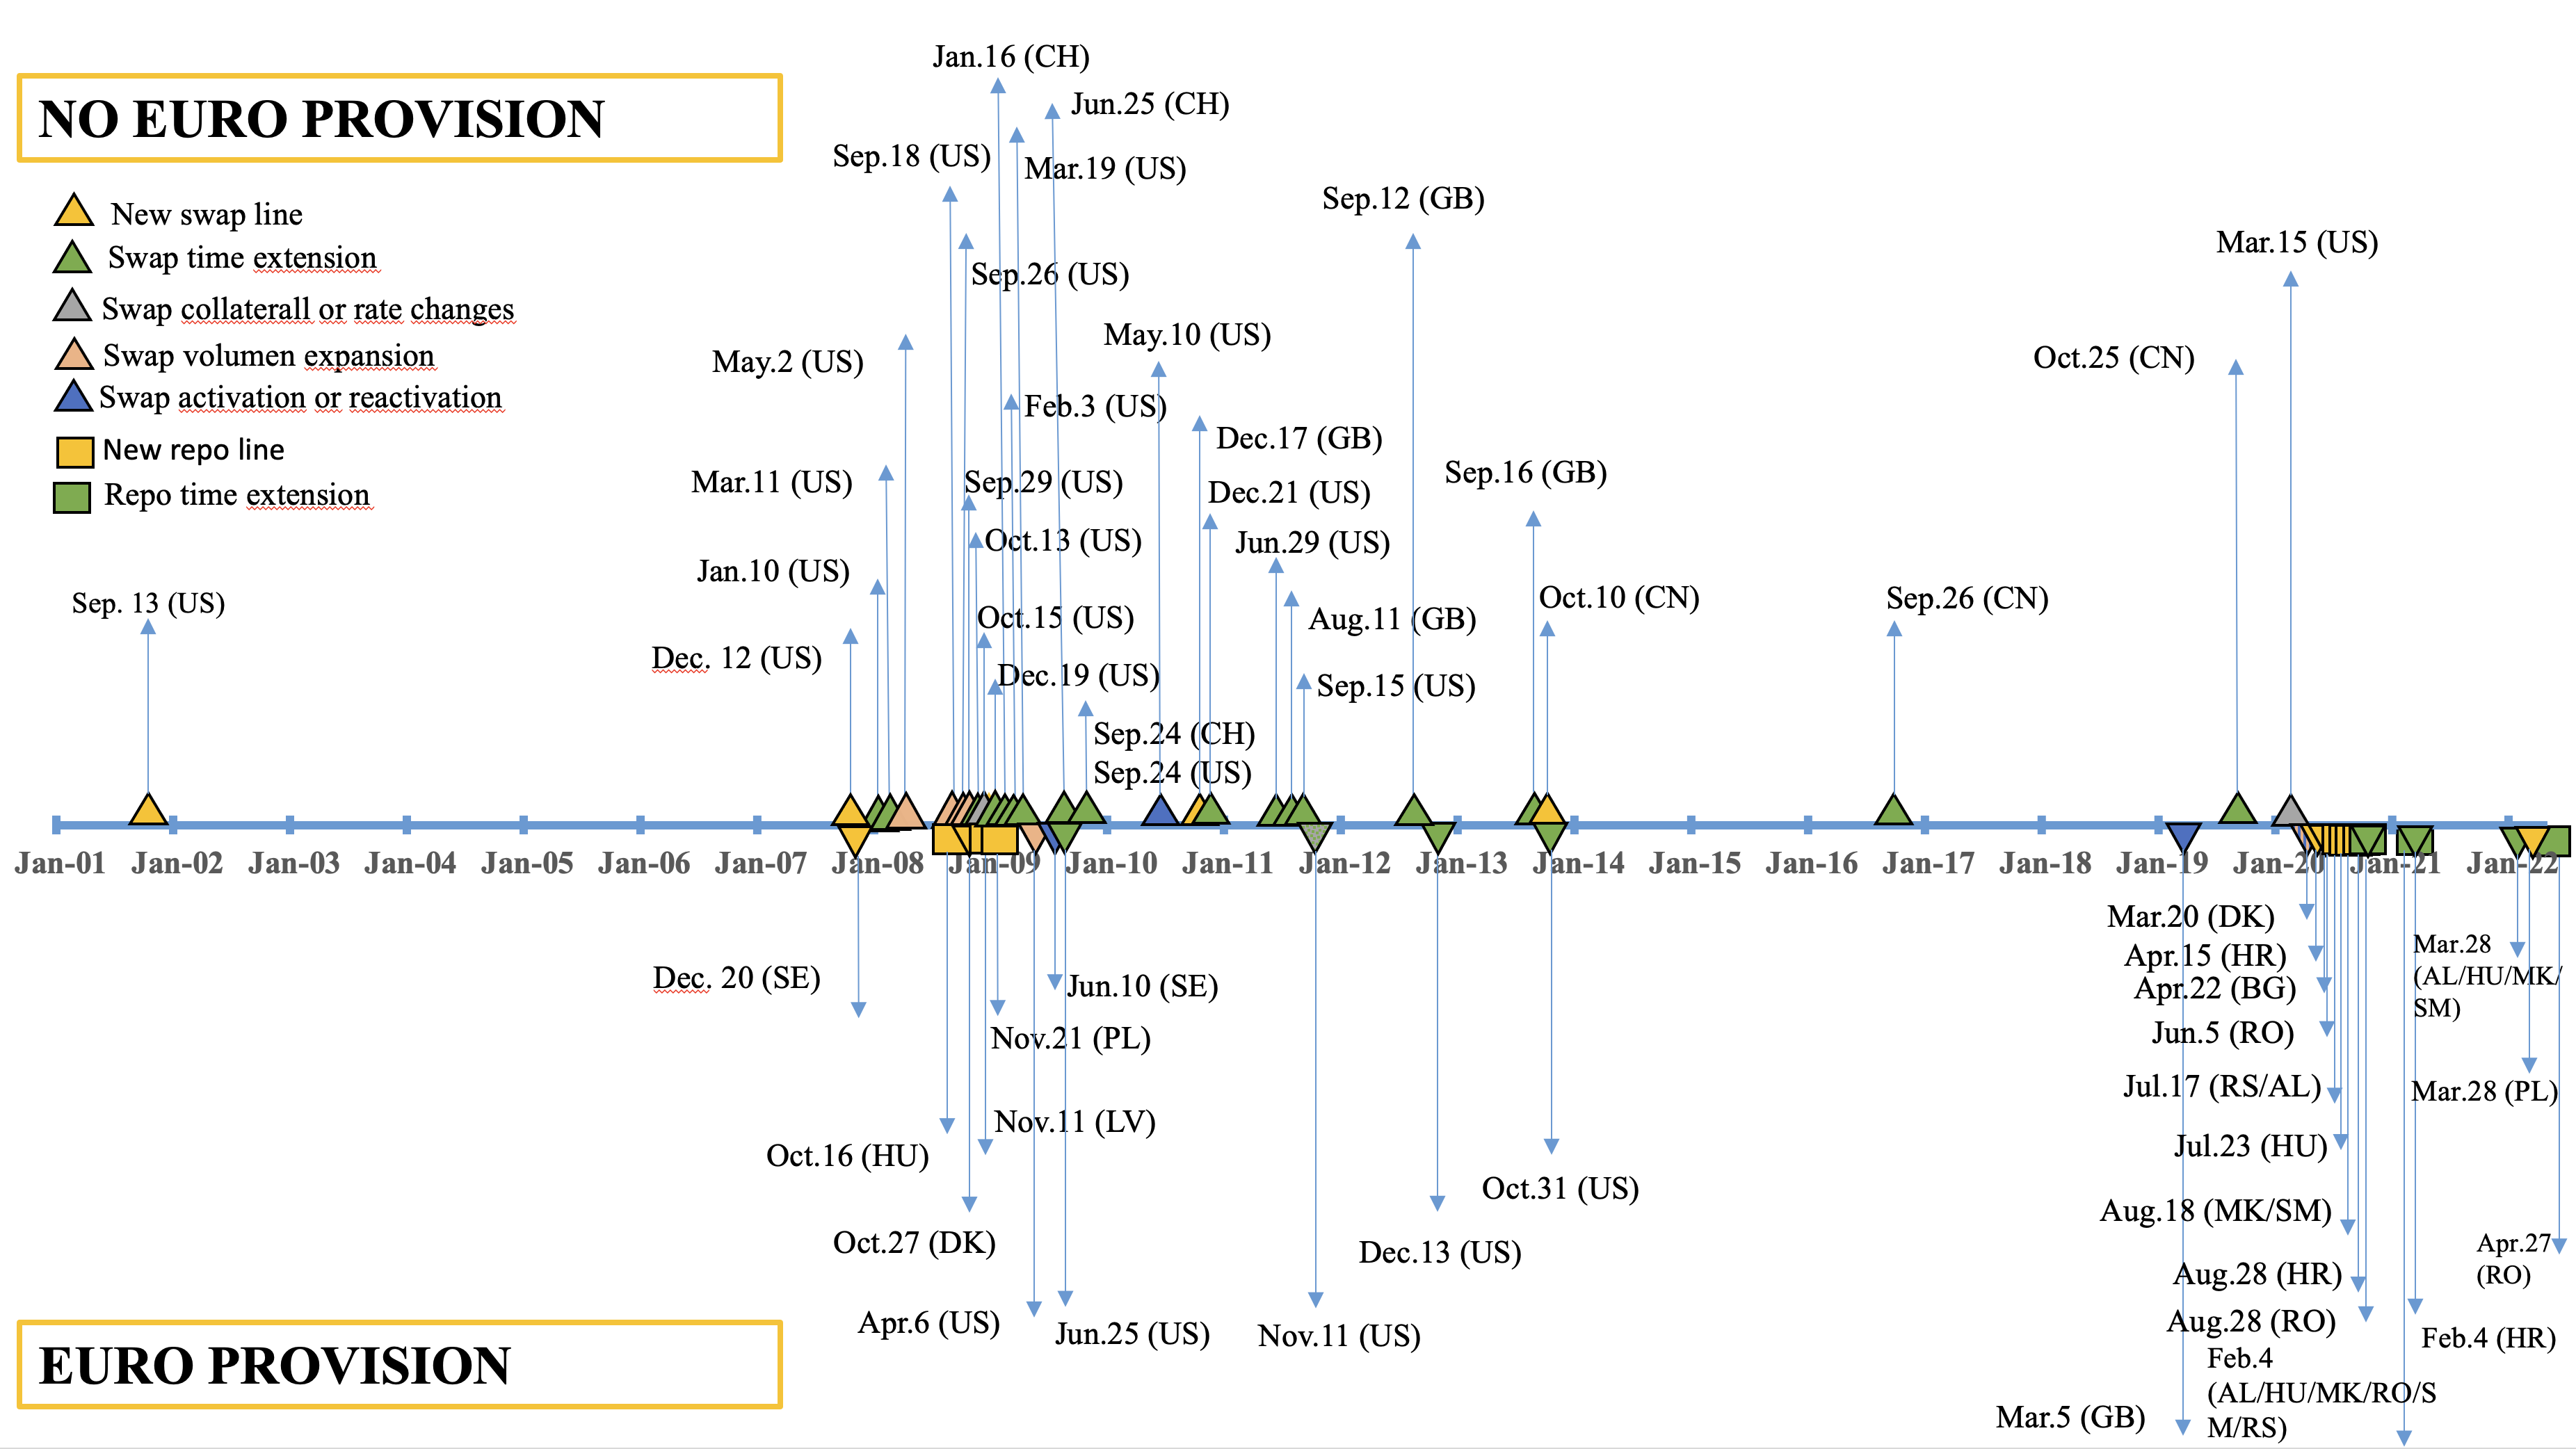 Figure 1 Timeline of the ECB swap and repo lines announcements providing euros and liquidity in other currencies